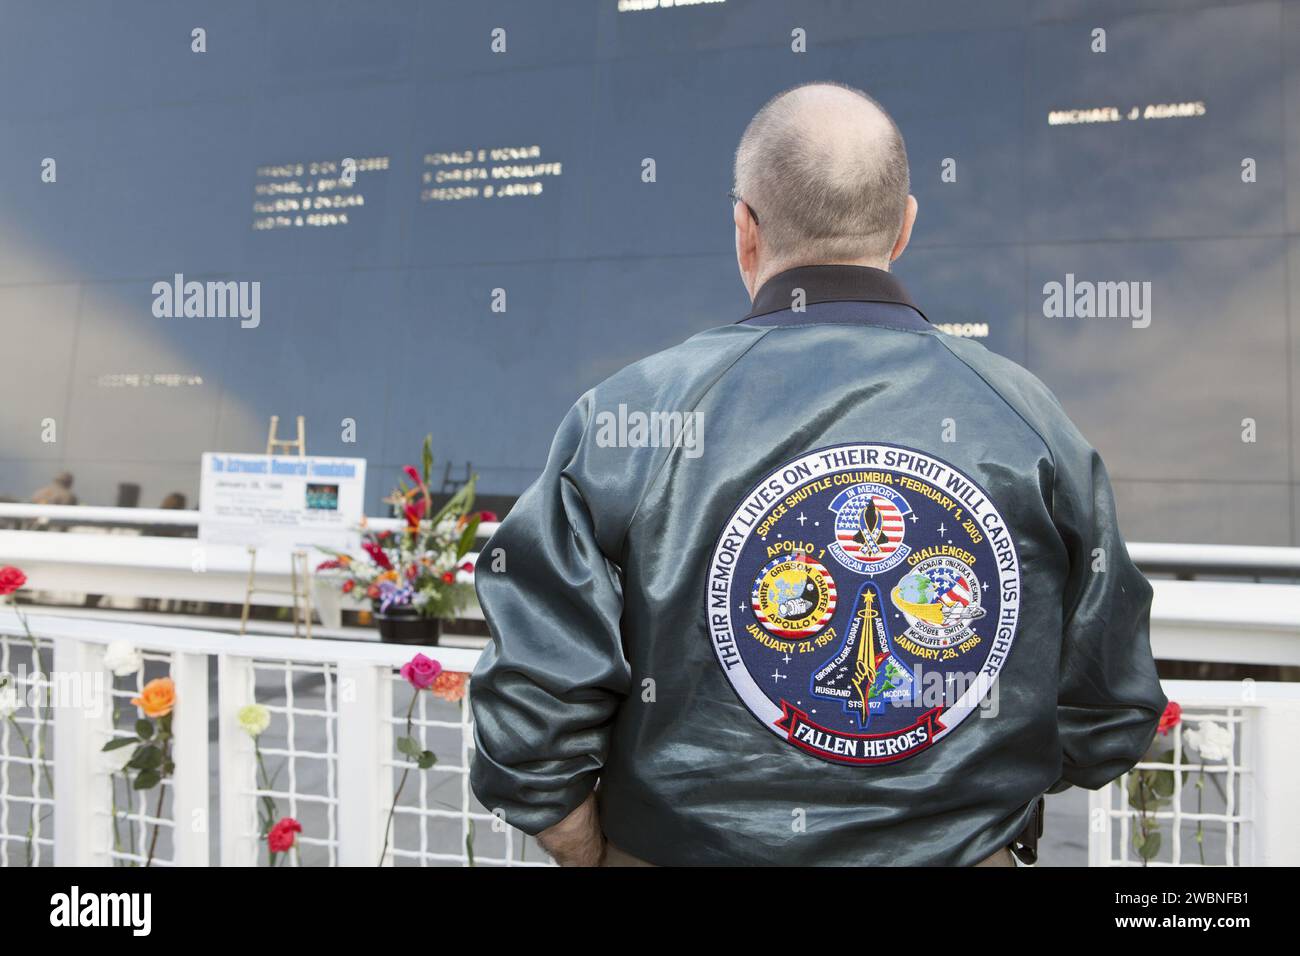 CAPE CANAVERAL, Fla. – The emblem on the jacket of a guest at NASA's Kennedy Space Center Visitor Complex commemorates NASA's 'fallen heroes' whose names are etched on the Astronauts Memorial Foundation's Space Mirror Memorial, following a ceremony on the 28th anniversary of the space shuttle Challenger accident. The day of the accident in 1986 dawned bitterly cold. Temperatures hovered just a few degrees above freezing as Challenger and its seven astronauts lifted off on the STS-51L mission. The flight ended just 73 seconds later when an O-ring in the right solid rocket booster failed, causin Stock Photo